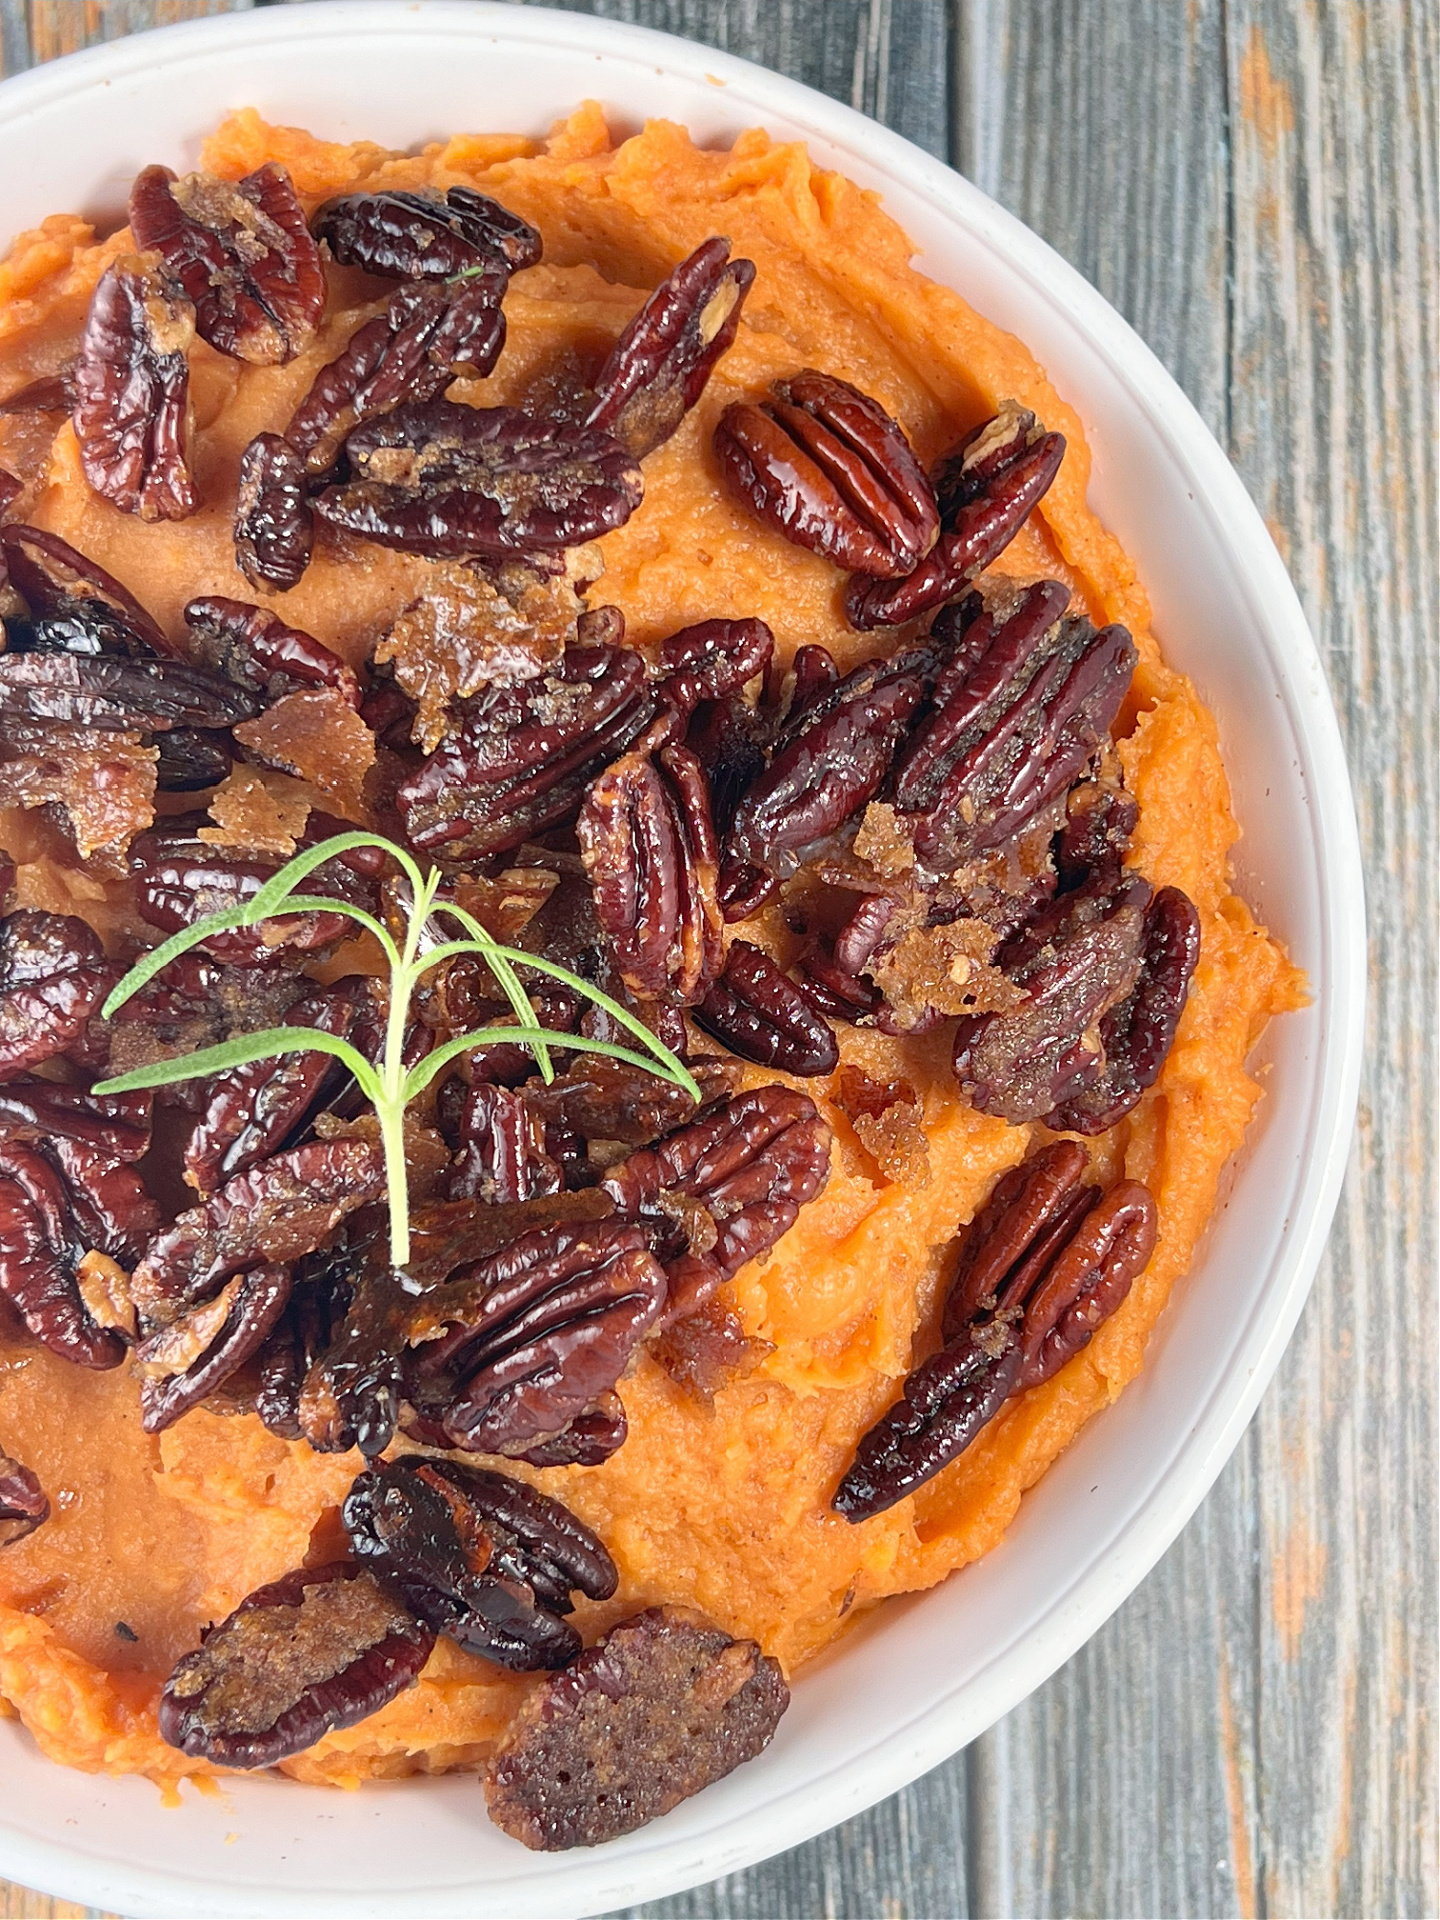 https://preventionrd.com/wp-content/uploads/2023/10/Vegan-Whipped-Sweet-Potatoes-with-Candied-Pecan-Topping-4.jpg